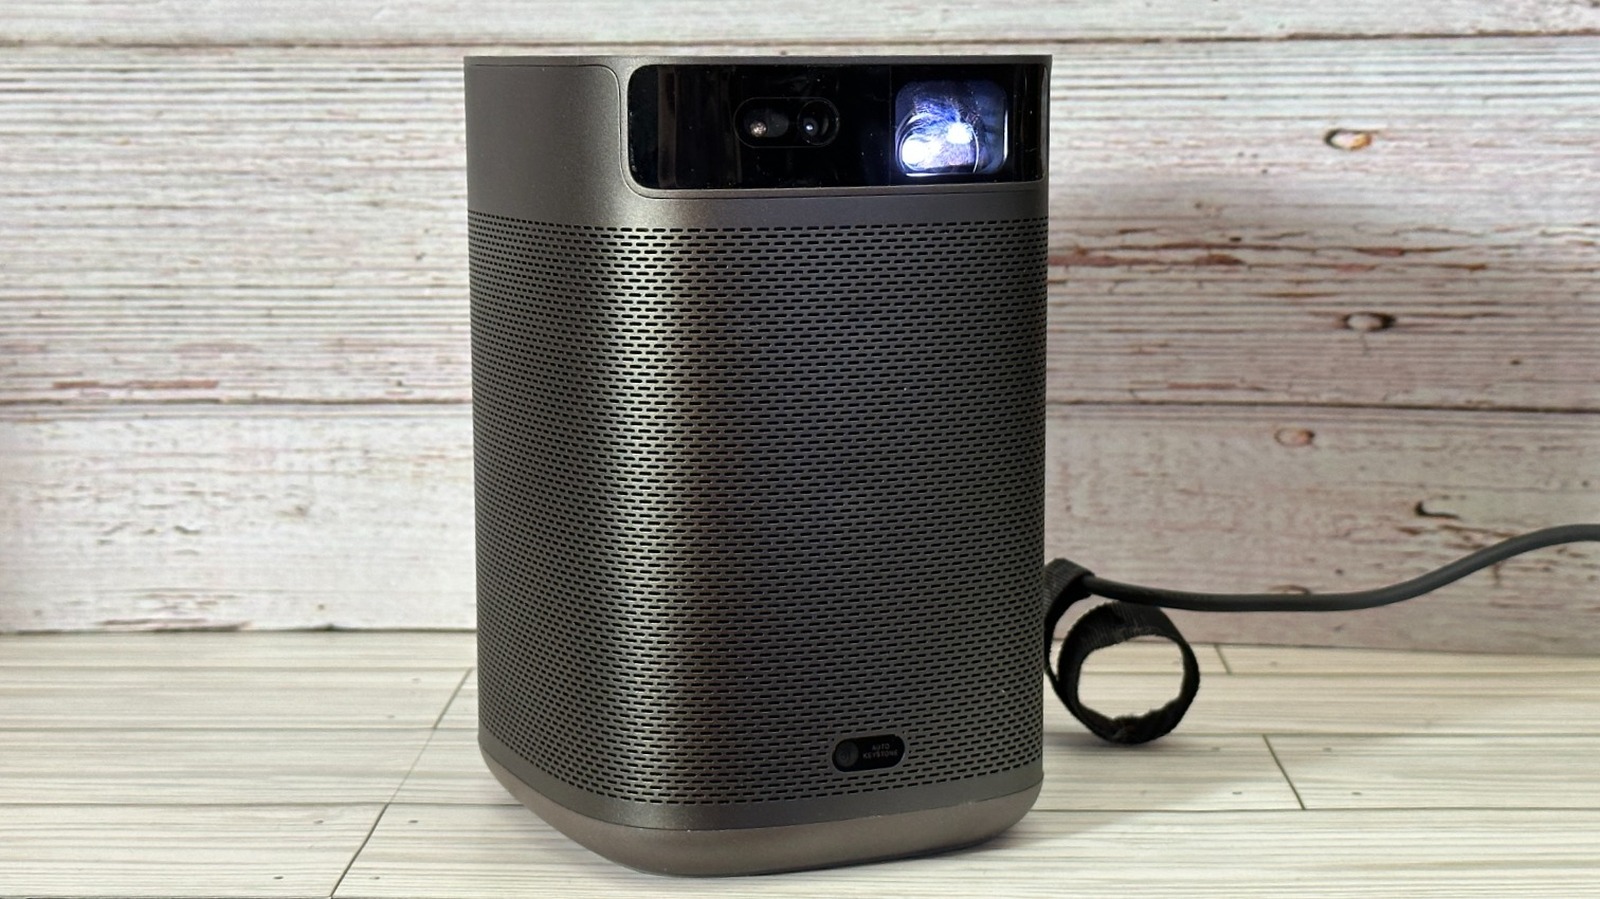 XGIMI MoGo 2 Pro: One of the Best Portable Projectors of 2023